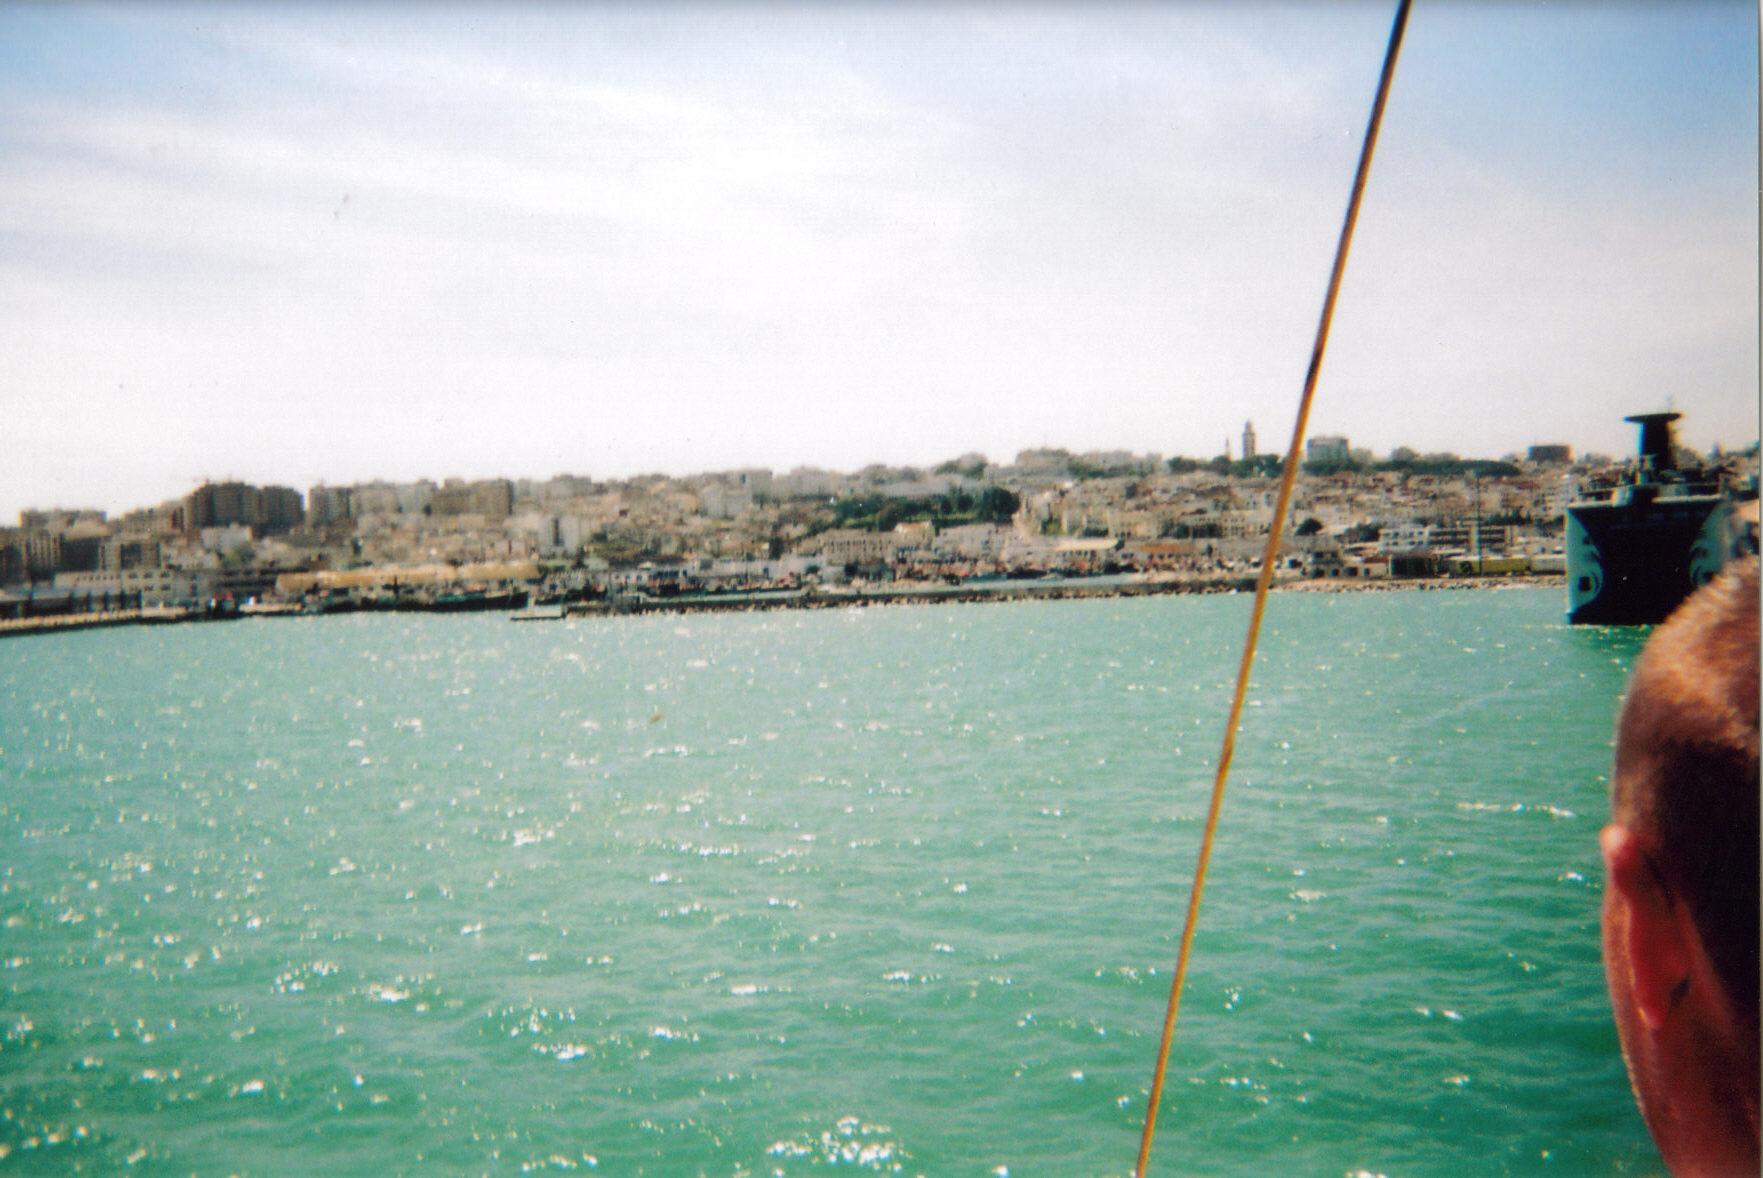 View from a boat towards the shore of Tangier in Morocco, with lots of buildings visible on the hilly landscape.